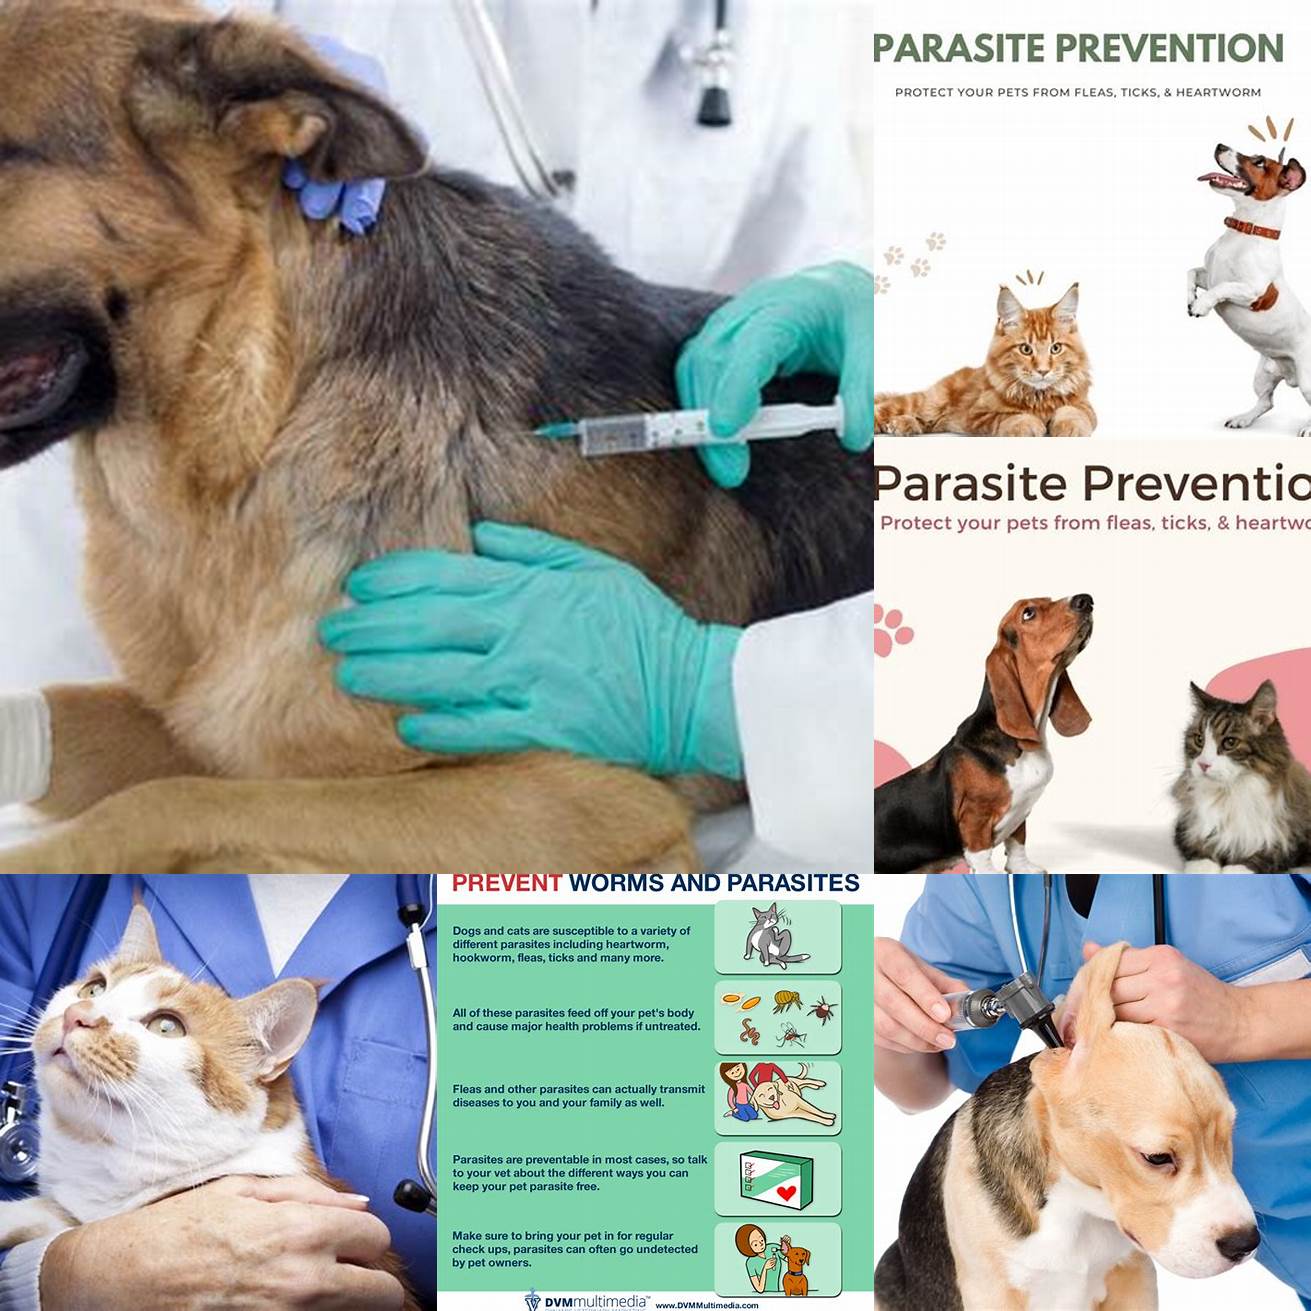 Keep both pets up-to-date on their vaccinations and parasite prevention